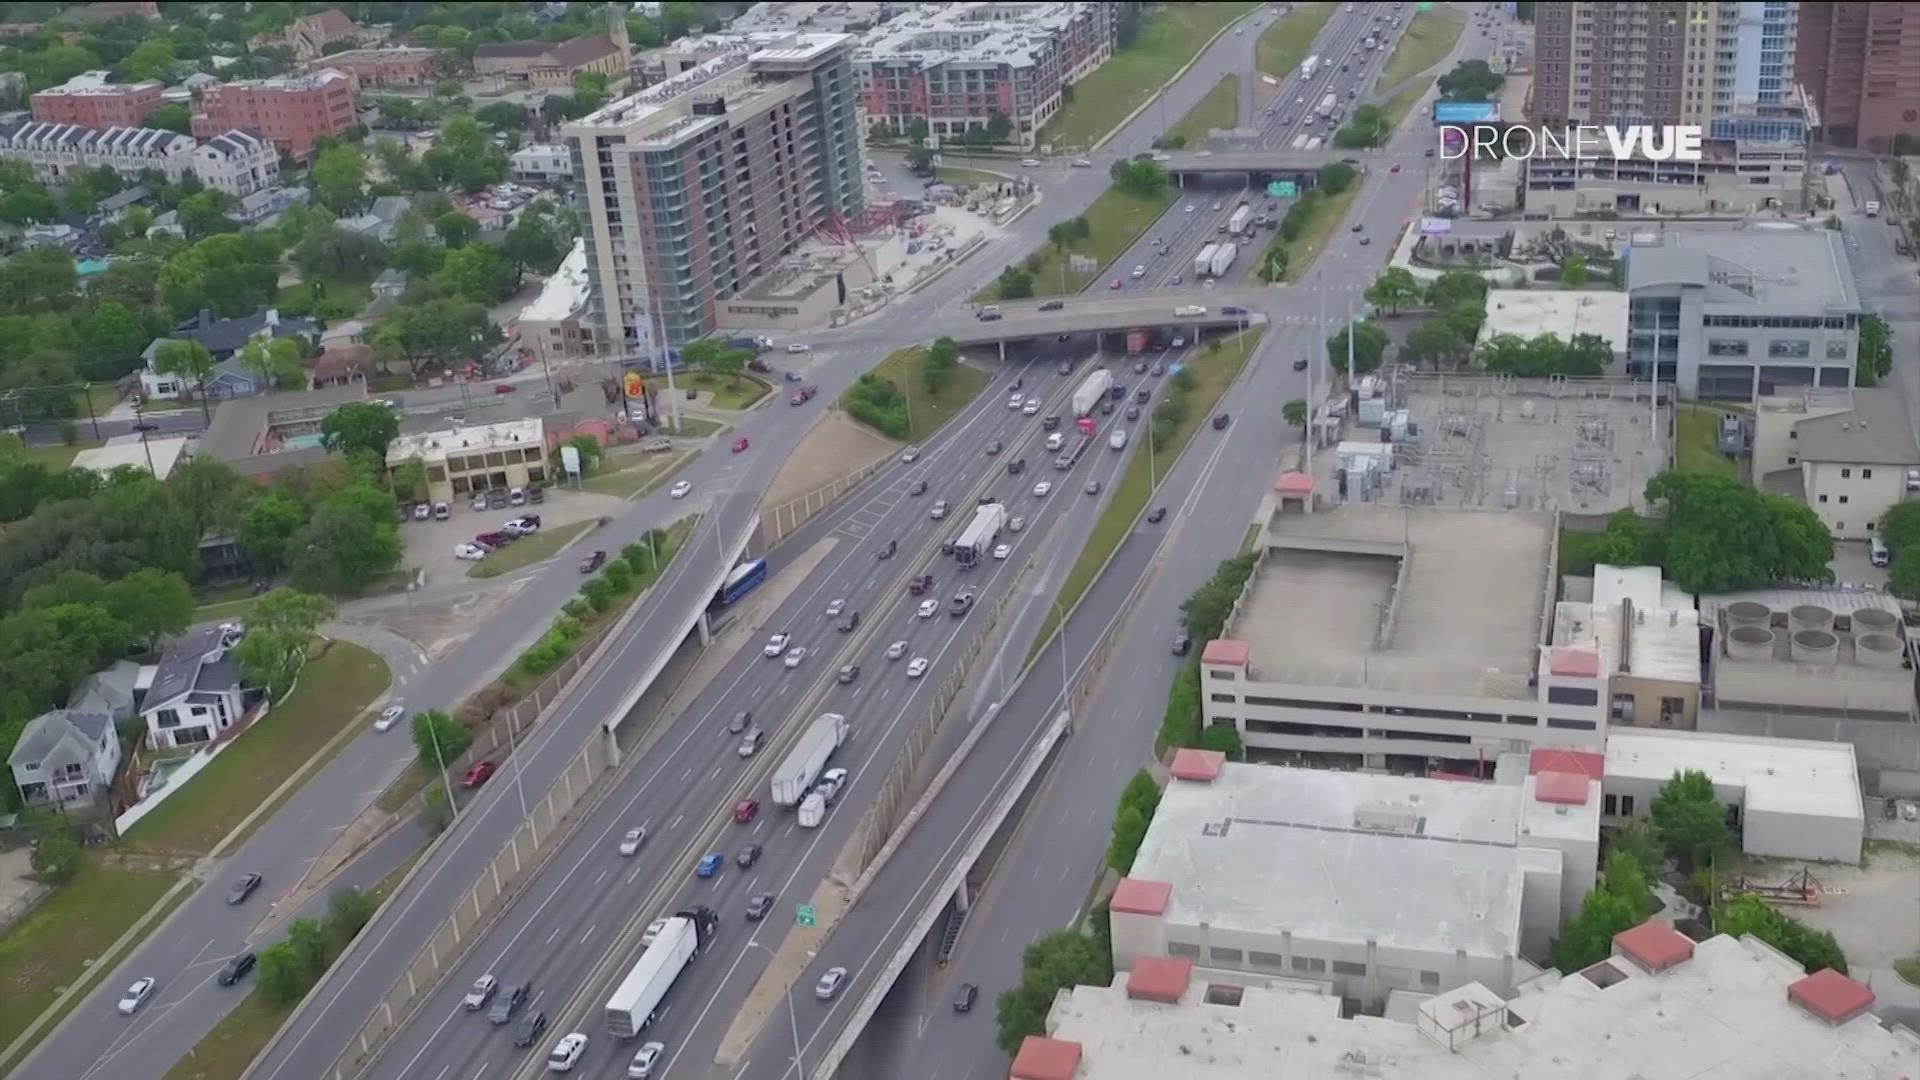 Local leaders want TxDOT to take a closer look at how plans to expand I-35 through Central Austin would affect the community.